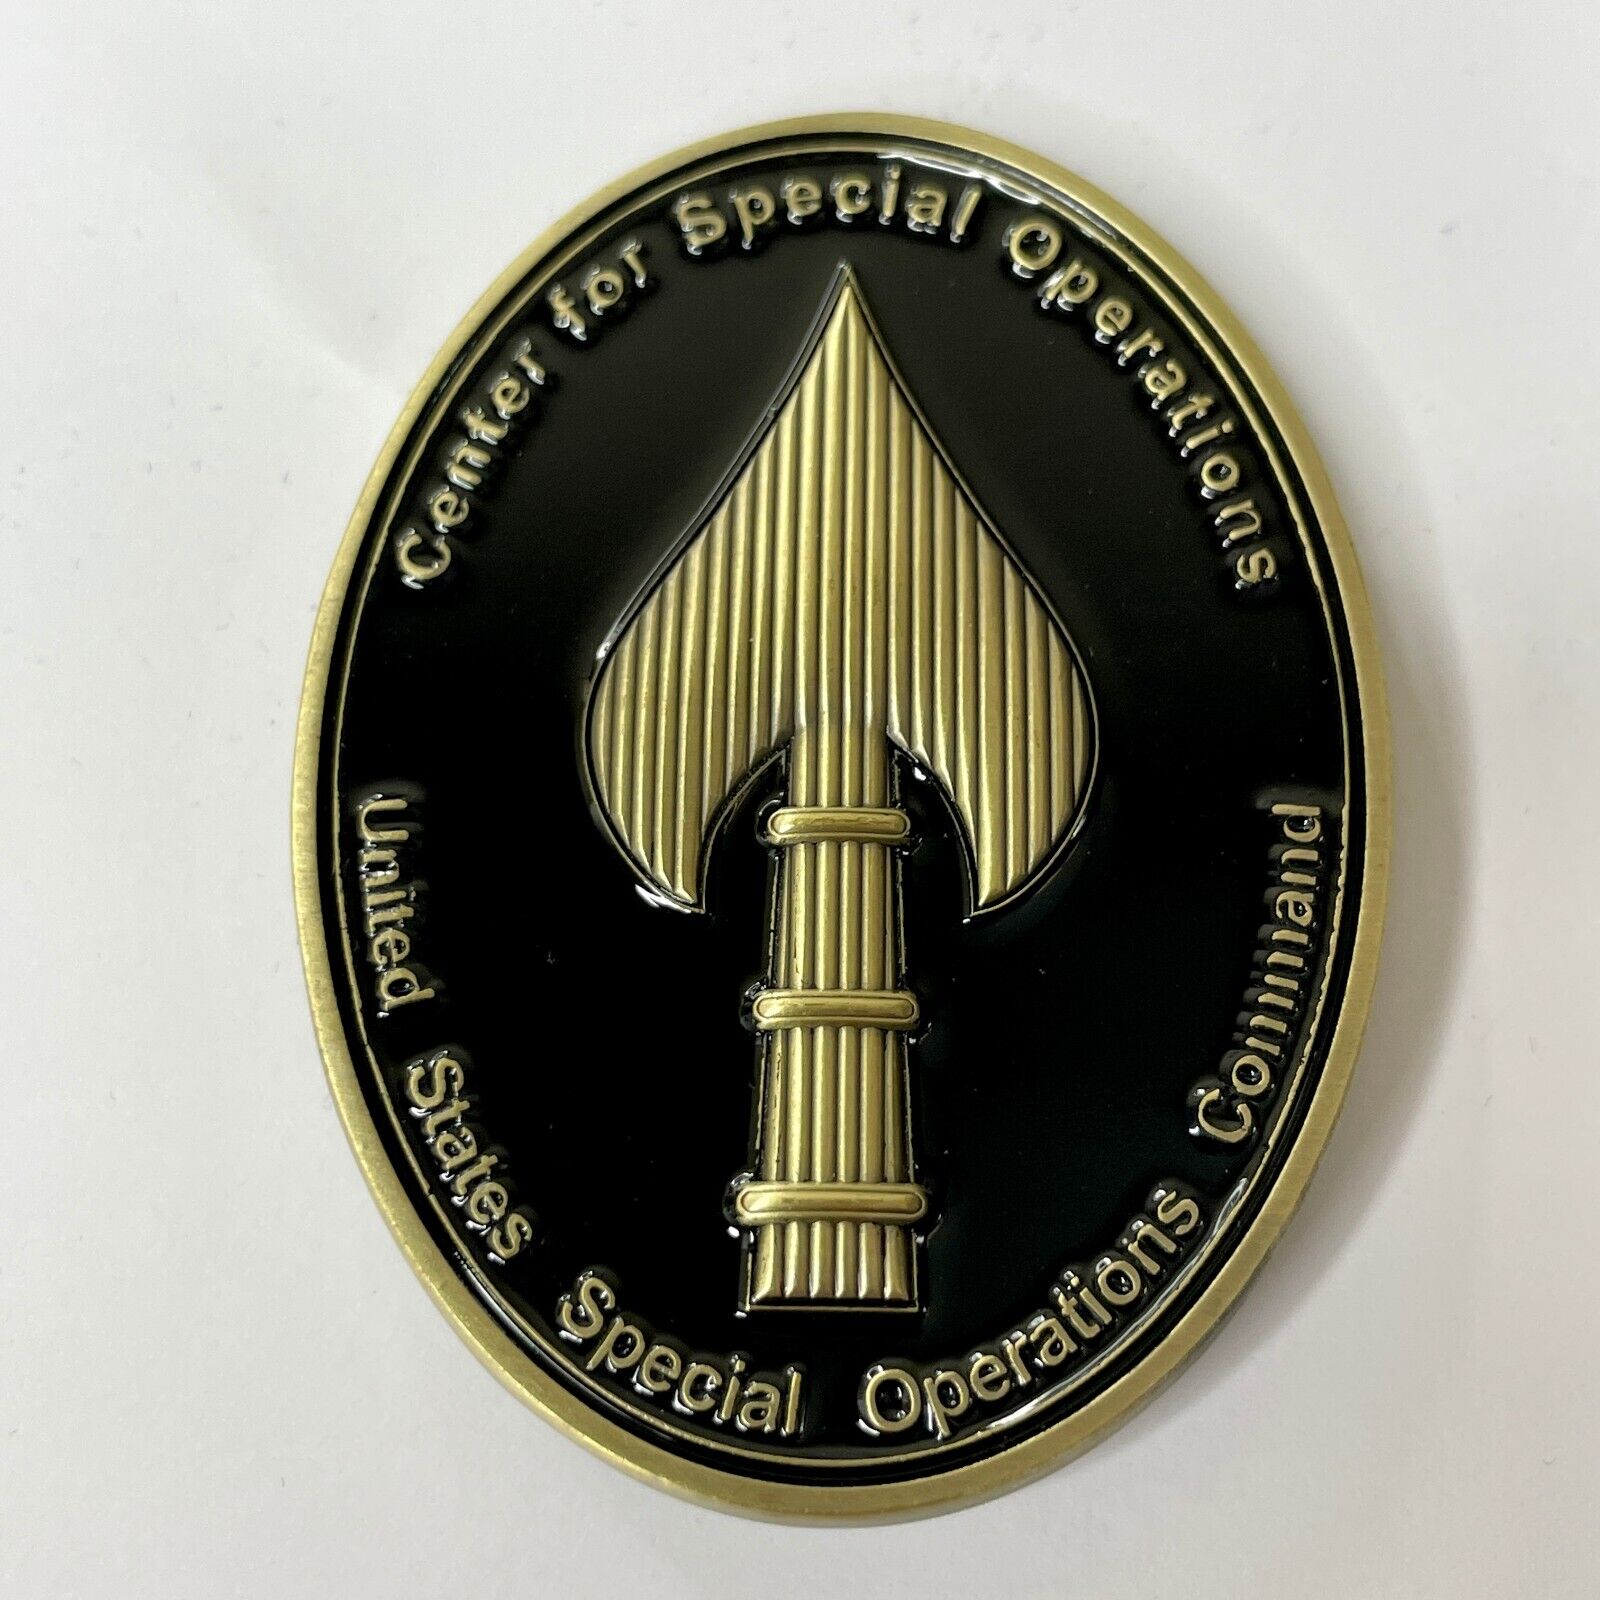 US SOCOM Center for Special Operations Director of Operations Coin